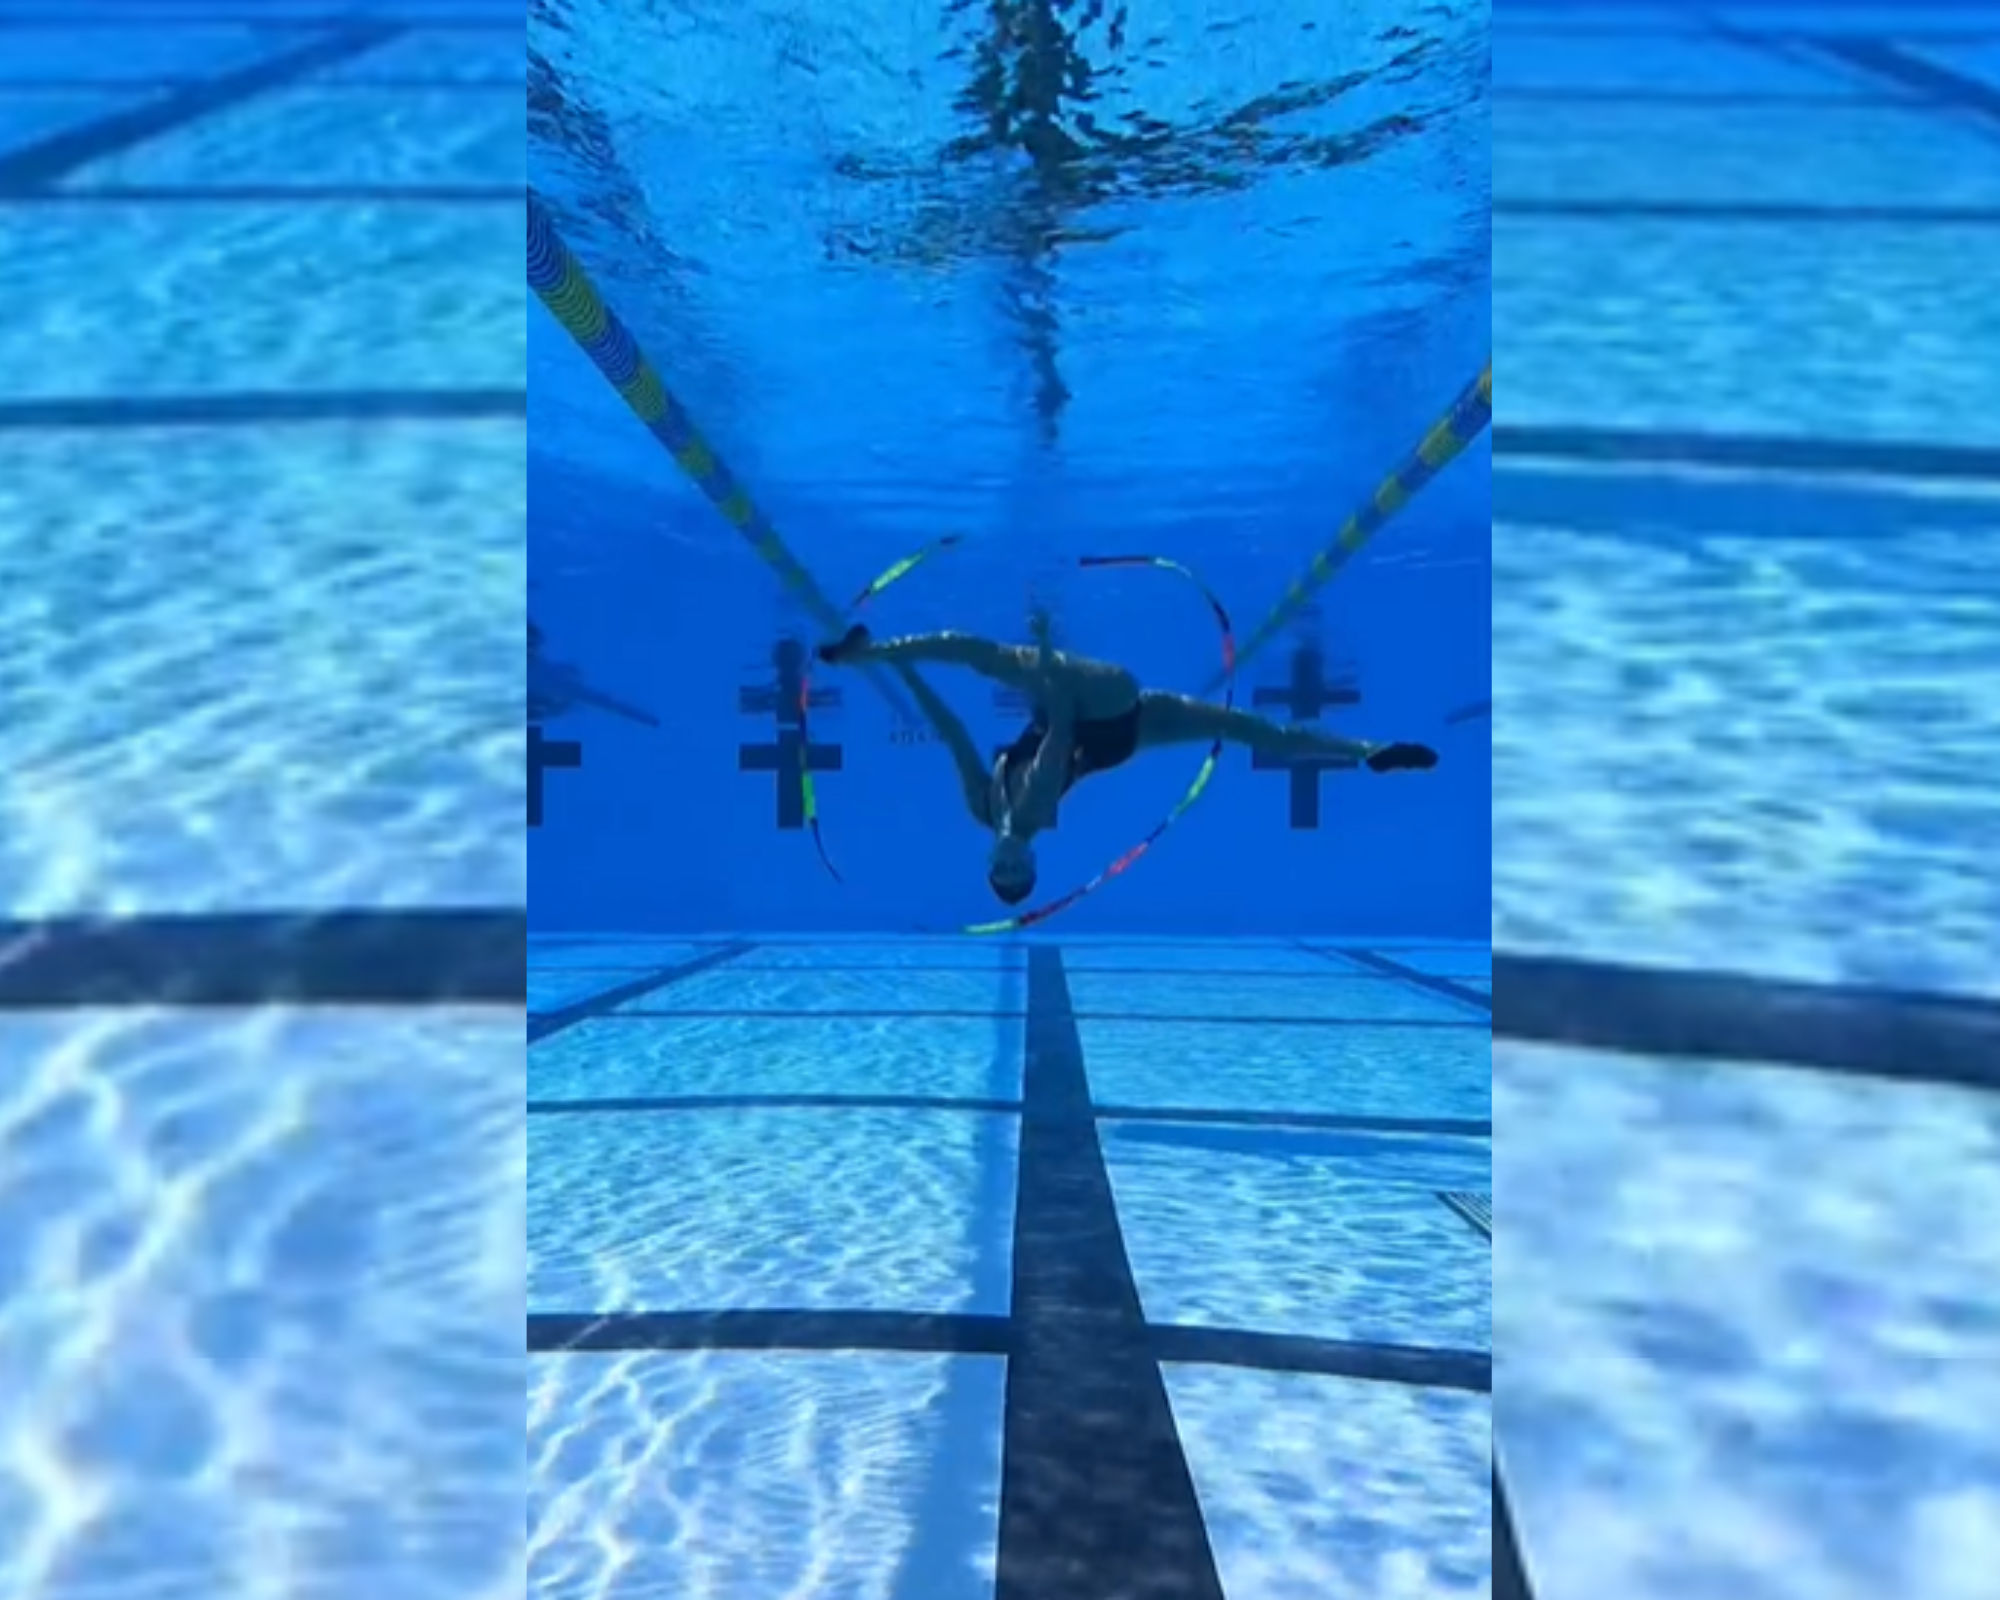 Watch this stunning video of a woman performing underwater gymnastics